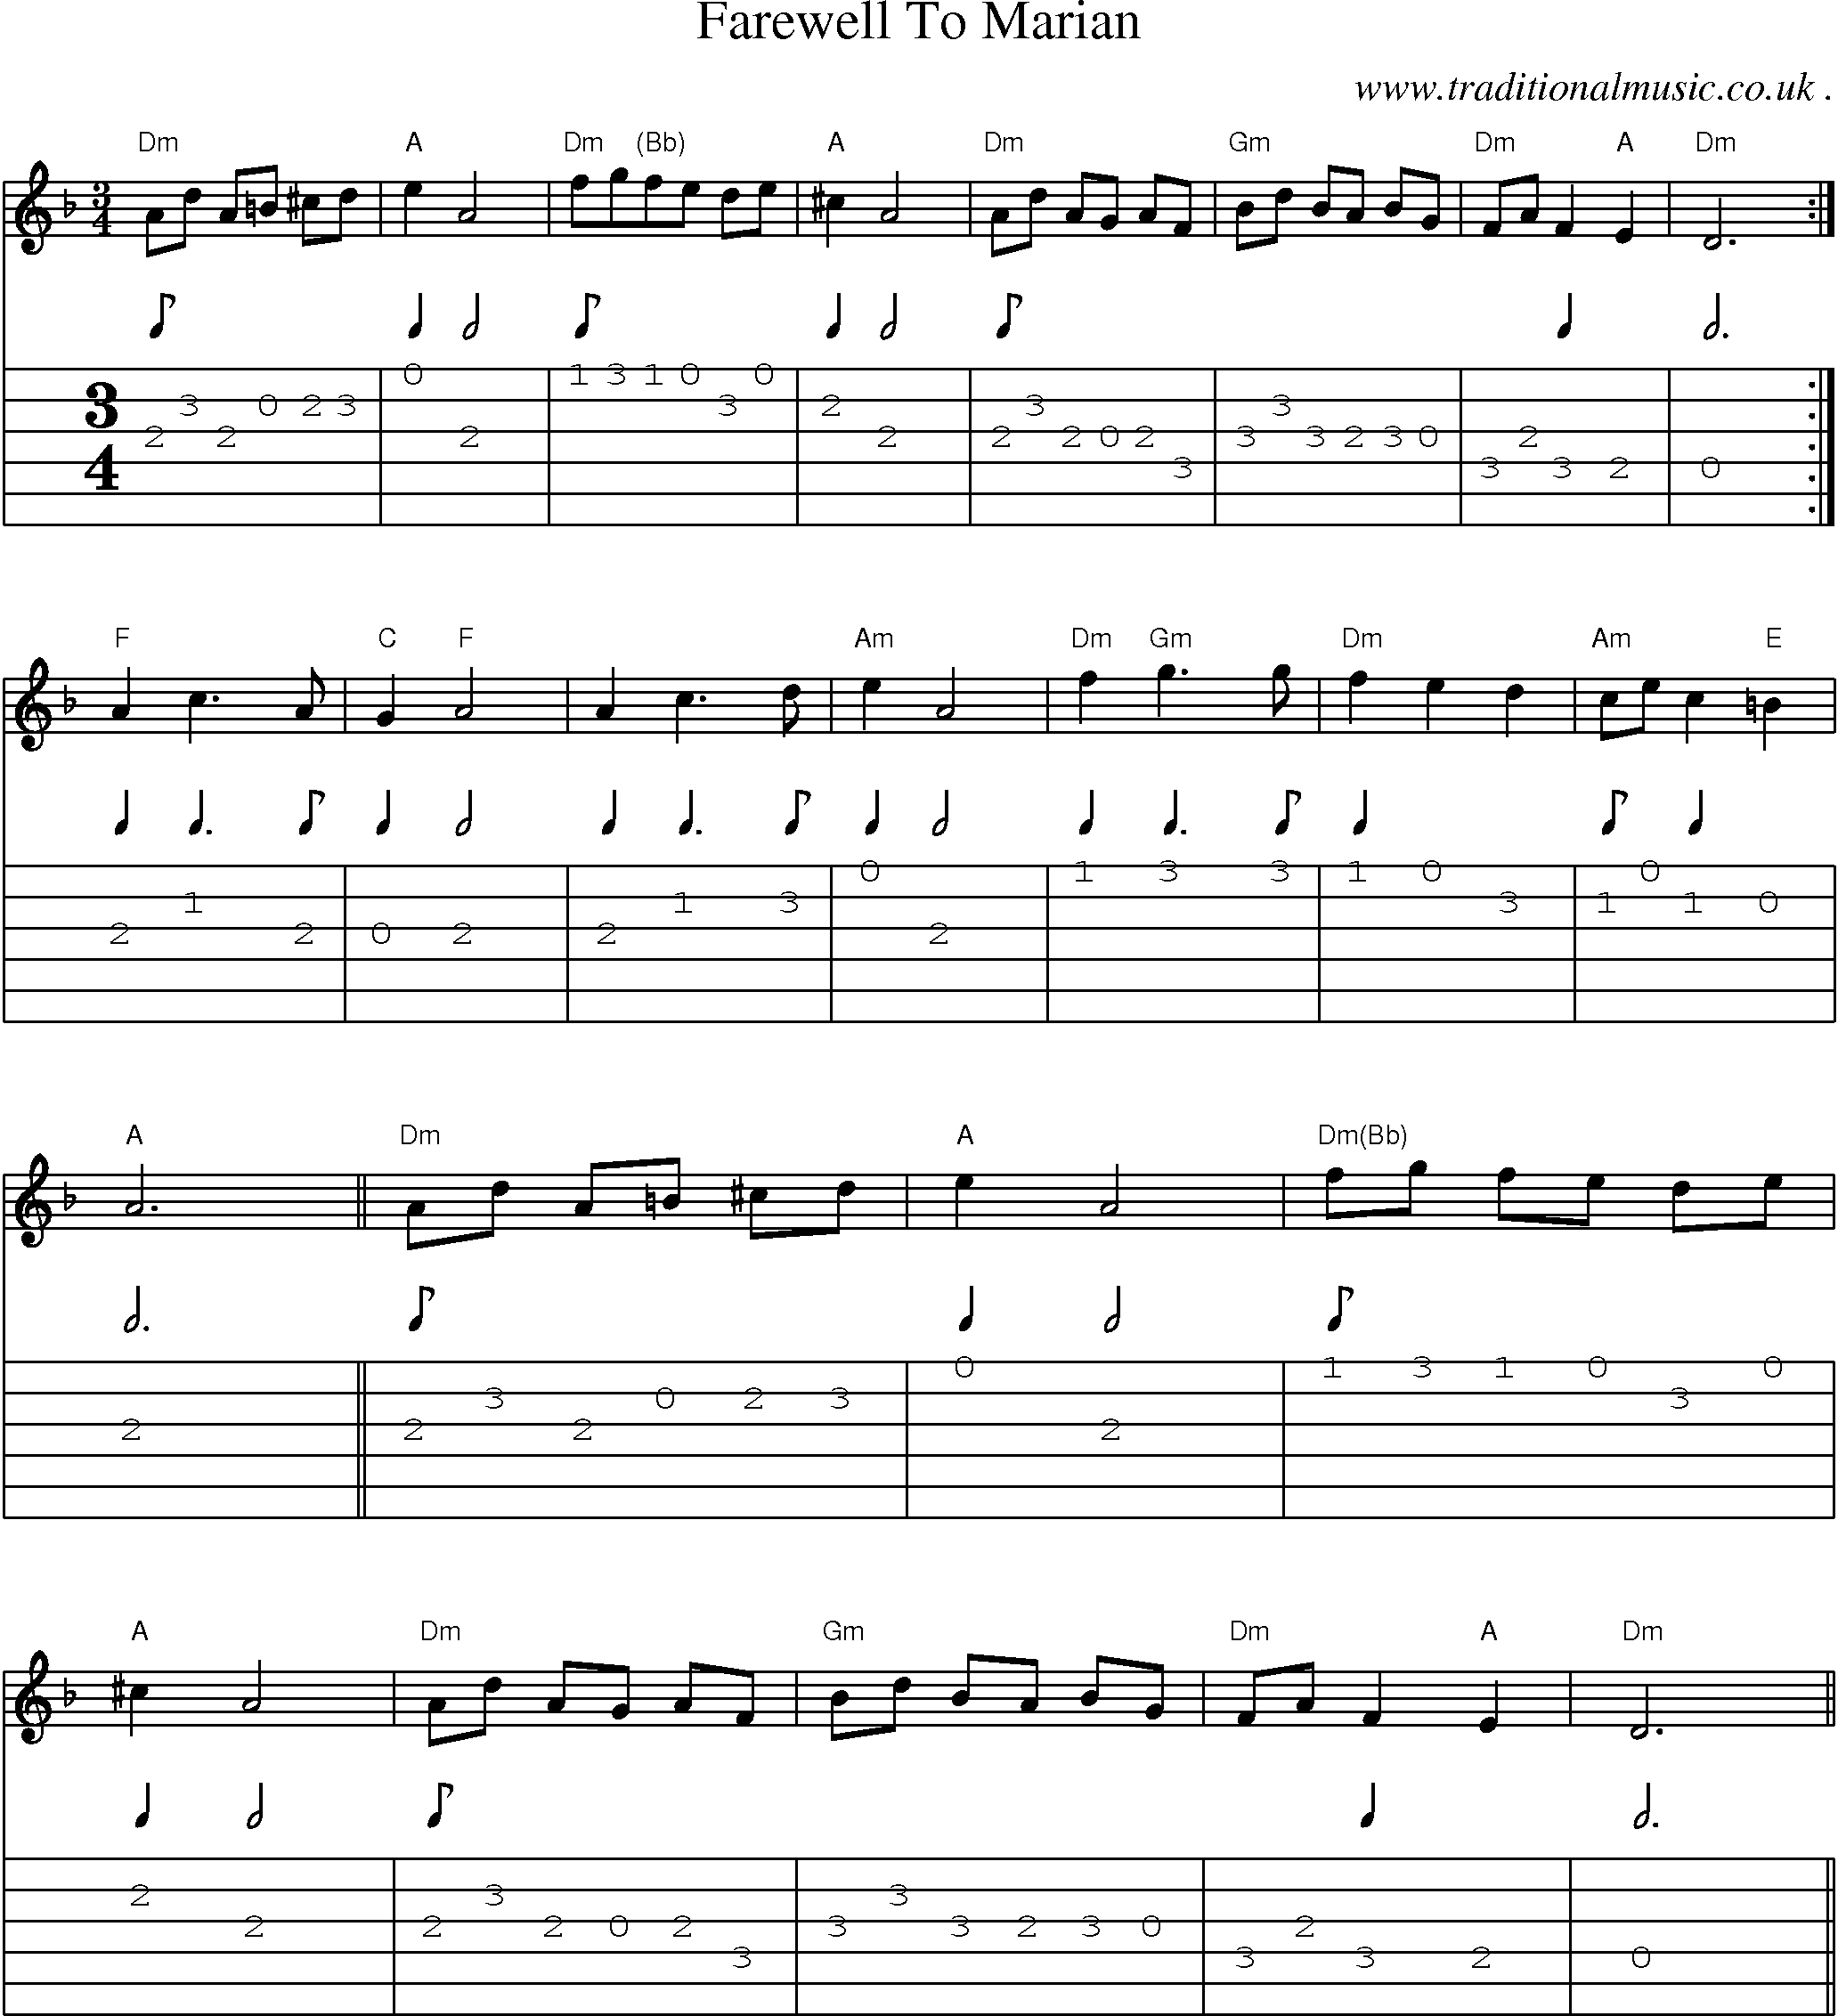 Sheet-Music and Guitar Tabs for Farewell To Marian